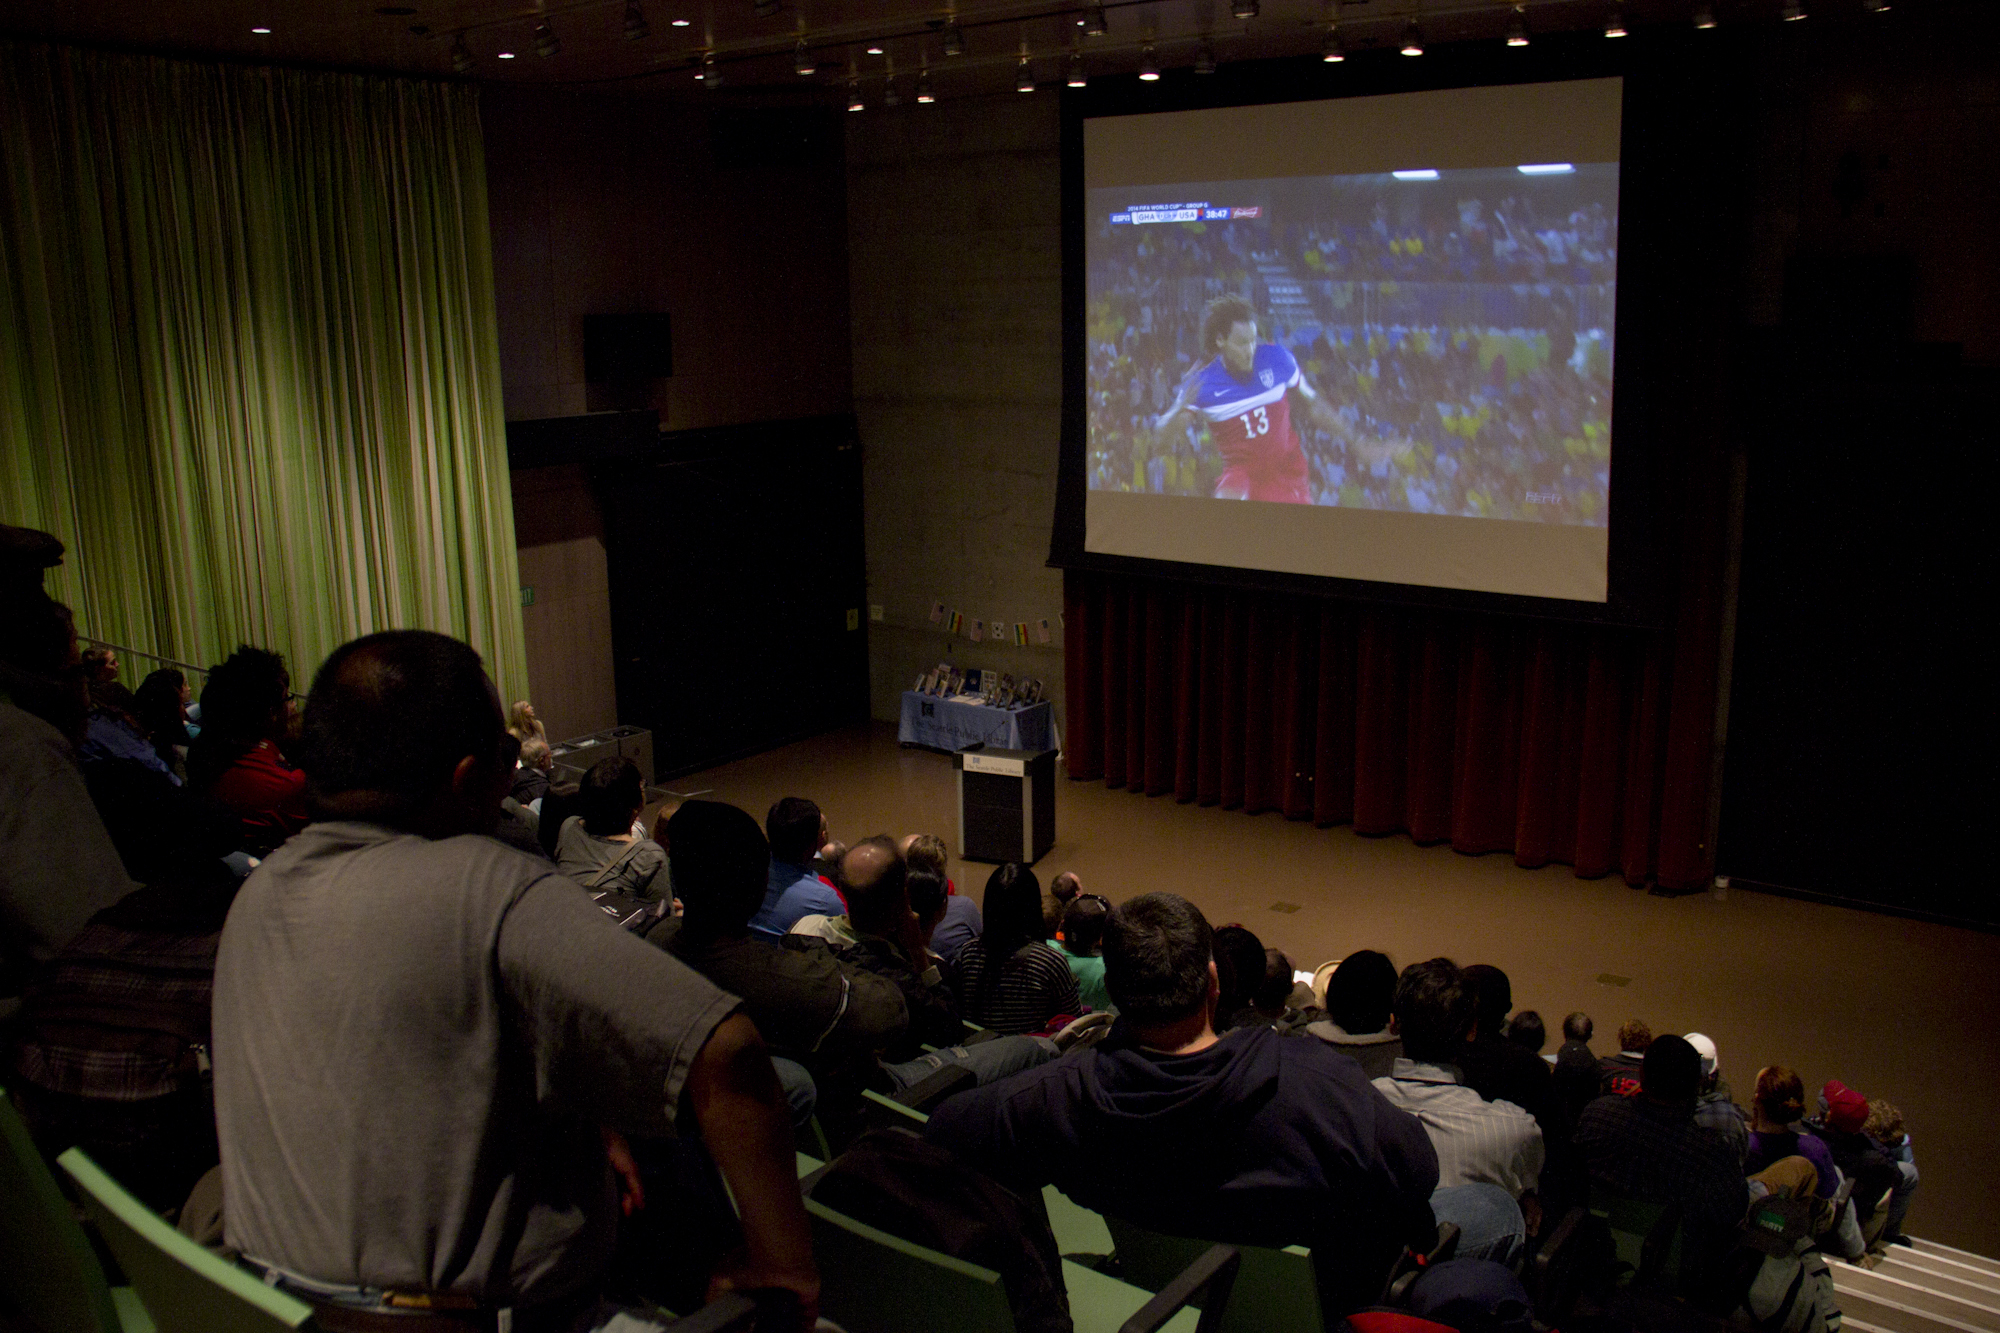 The Seattle Public Library kicked off their first public viewing of the 2014 FIFA World Cup